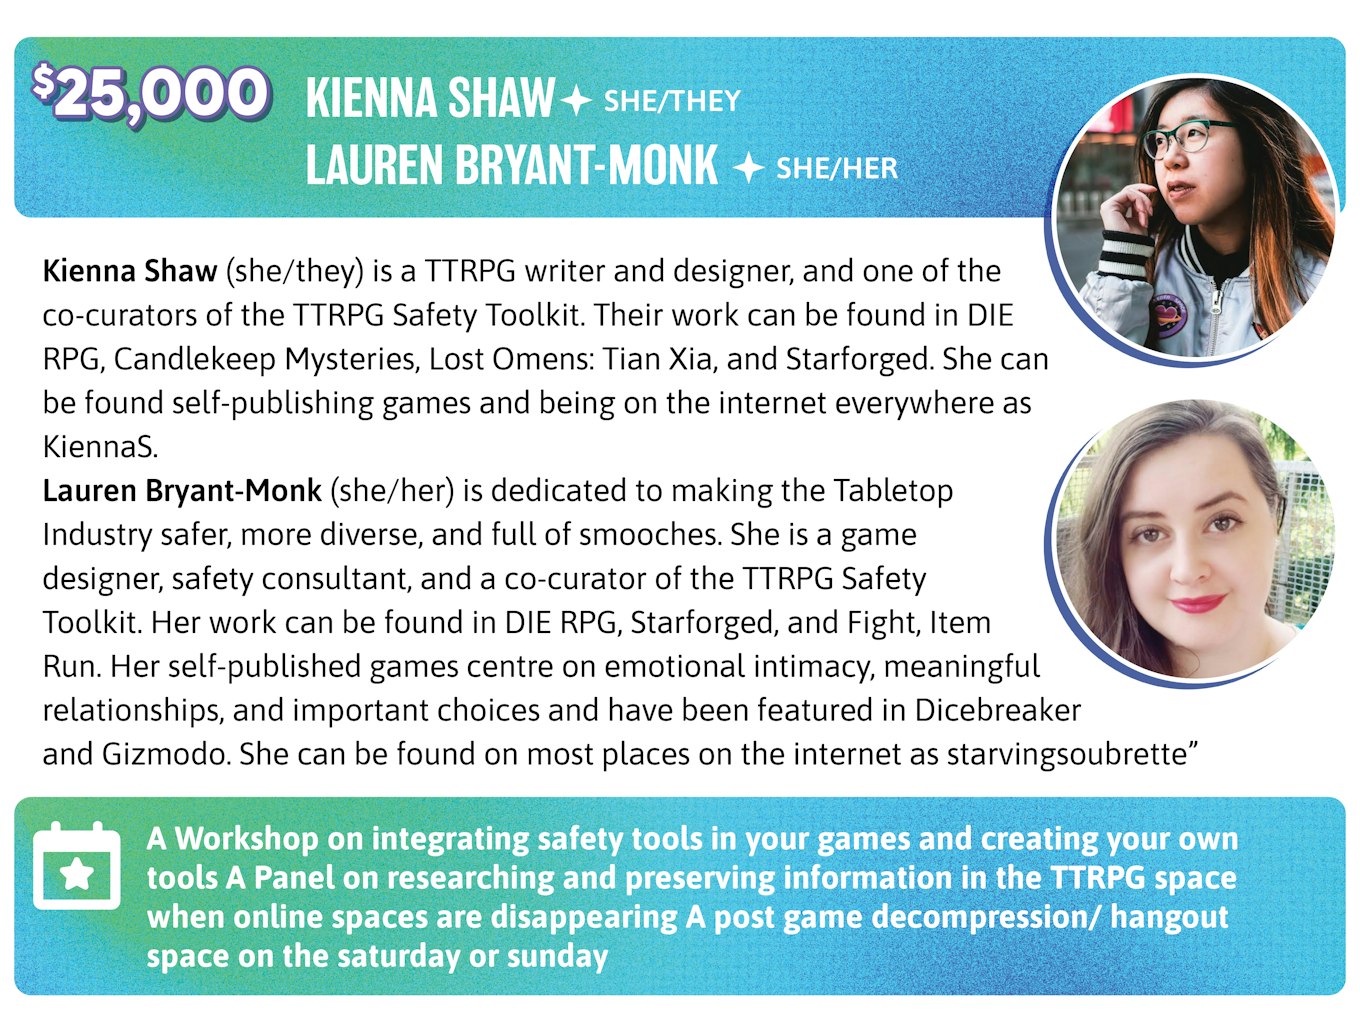 25,000. Kienna Shaw (she/they) is a TTRPG writer and designer, and one of the co-curators of the TTRPG Safety Toolkit. Their work can be found in DIE RPG, Candlekeep Mysteries, Lost Omens: Tian Xia, and Starforged. She can be found self-publishing games and being on the internet everywhere as KiennaS. Lauren Bryant-Monk (she/her) is dedicated to making the Tabletop Industry safer, more diverse, and full of smooches. She is a game designer, safety consultant, and a co-curator of the TTRPG Safety Toolkit. Events: A Workshop on integrating safety tools in your games and creating your own tools A Panel on researching and preserving information in the TTRPG space when online spaces are disappearing A post game decompression/ hangout space on the Saturday or Sunday